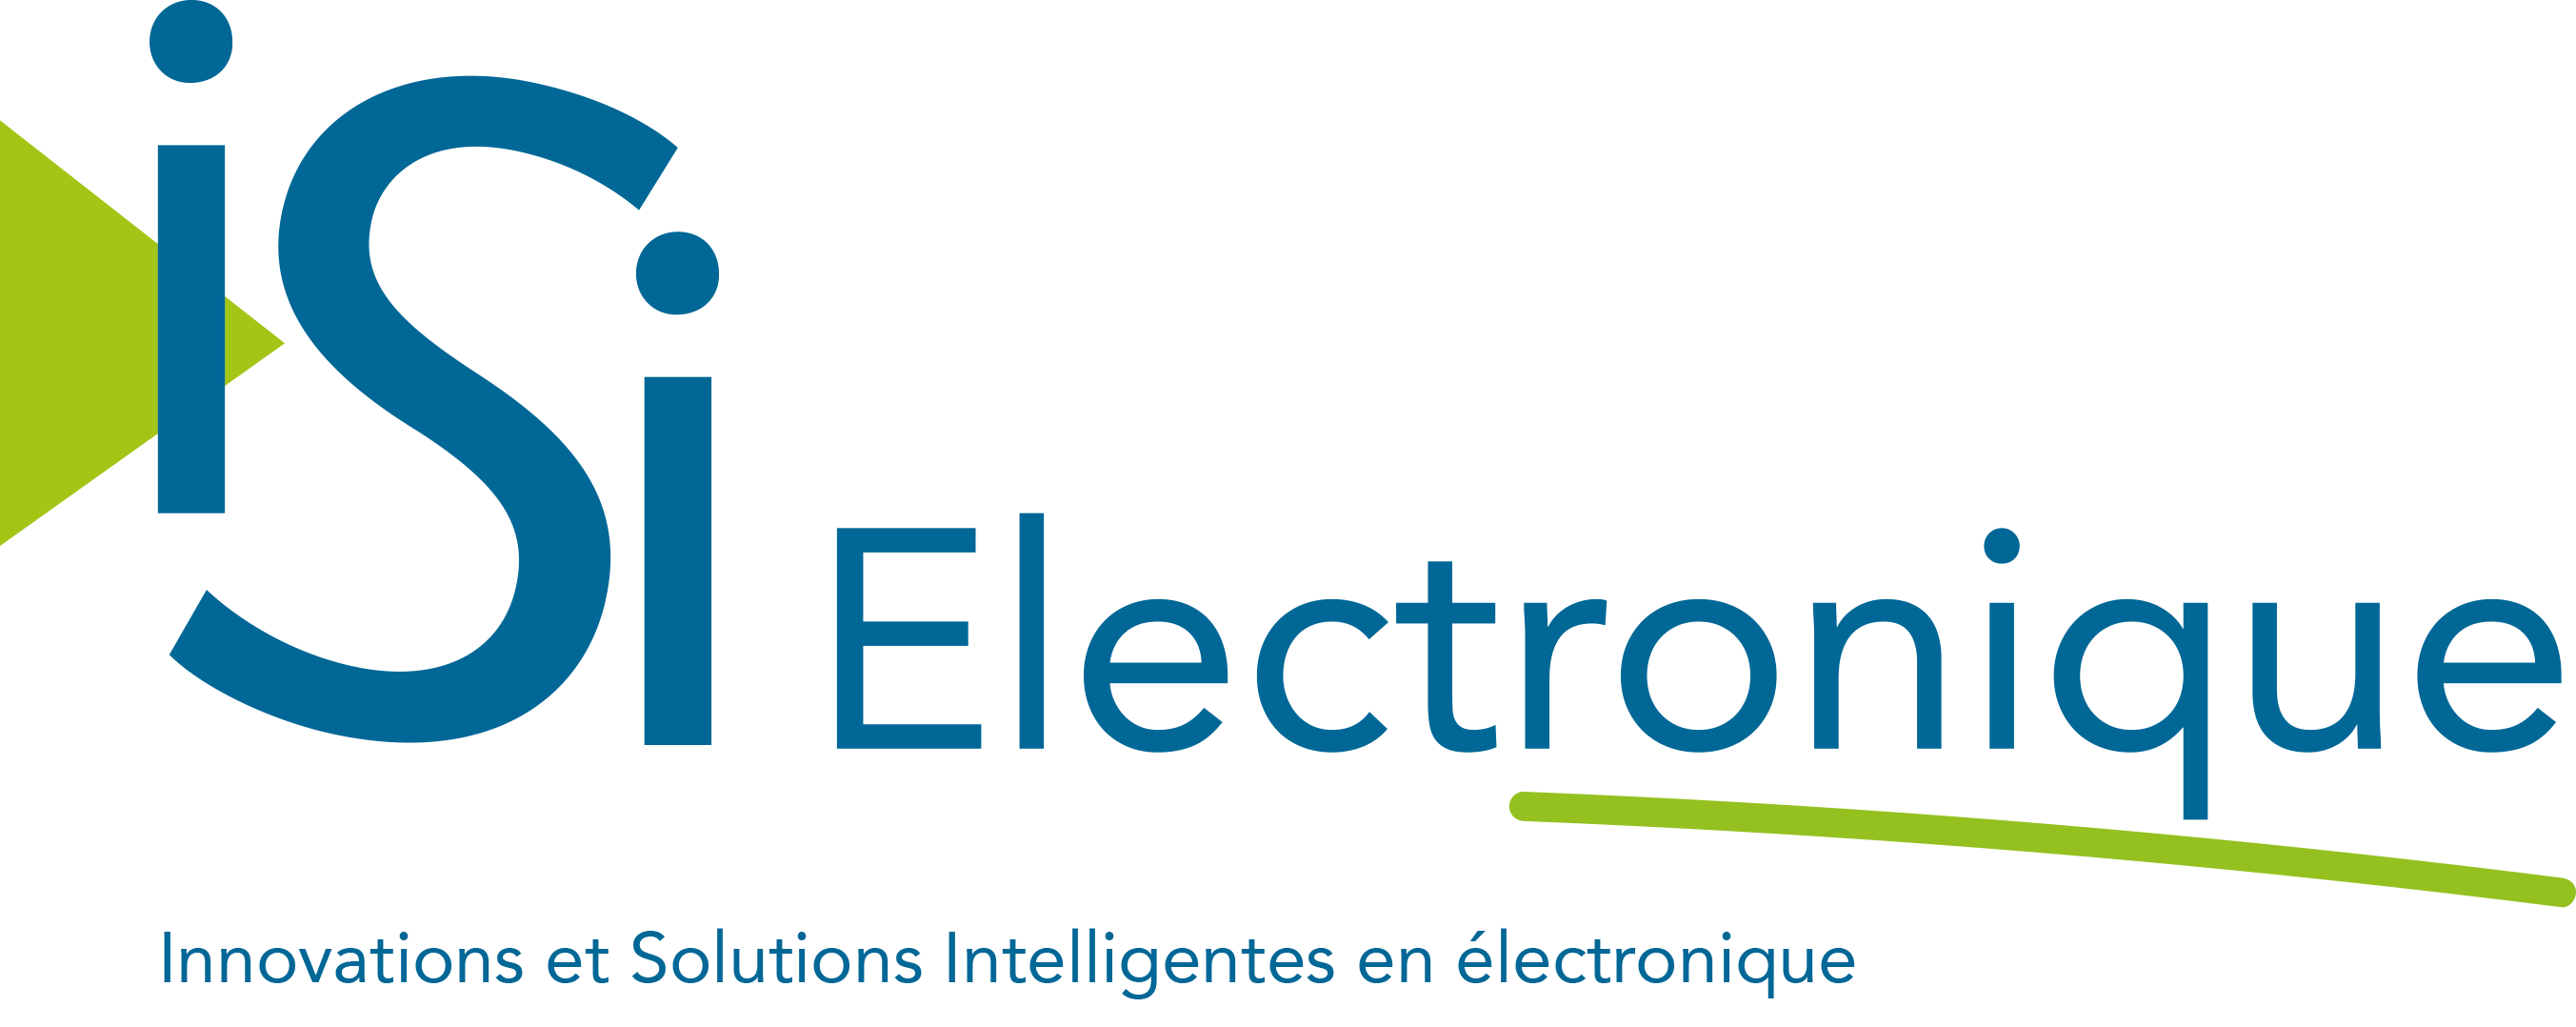 ISI Electronique